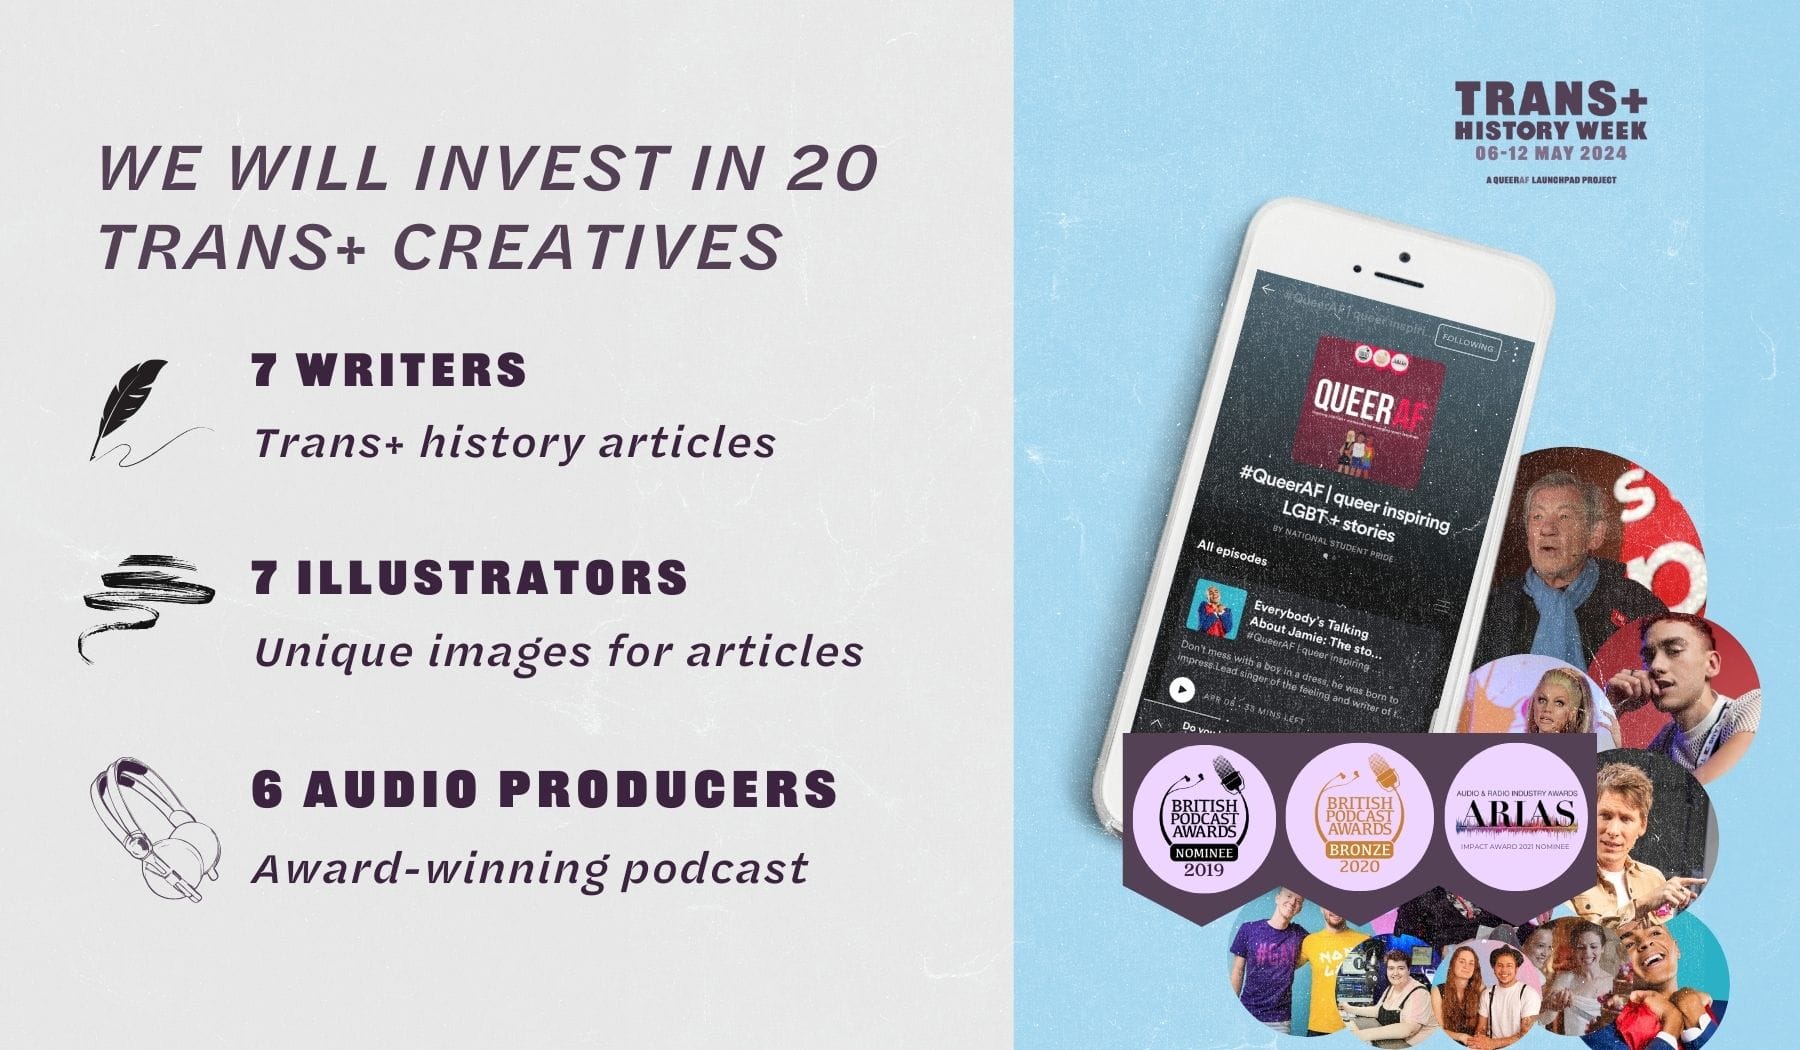 we will invest in 20  Trans+ creatives 7 writers Trans+ history articles 7 illustrators Unique images for articles 6 audio producers Award-winning podcast